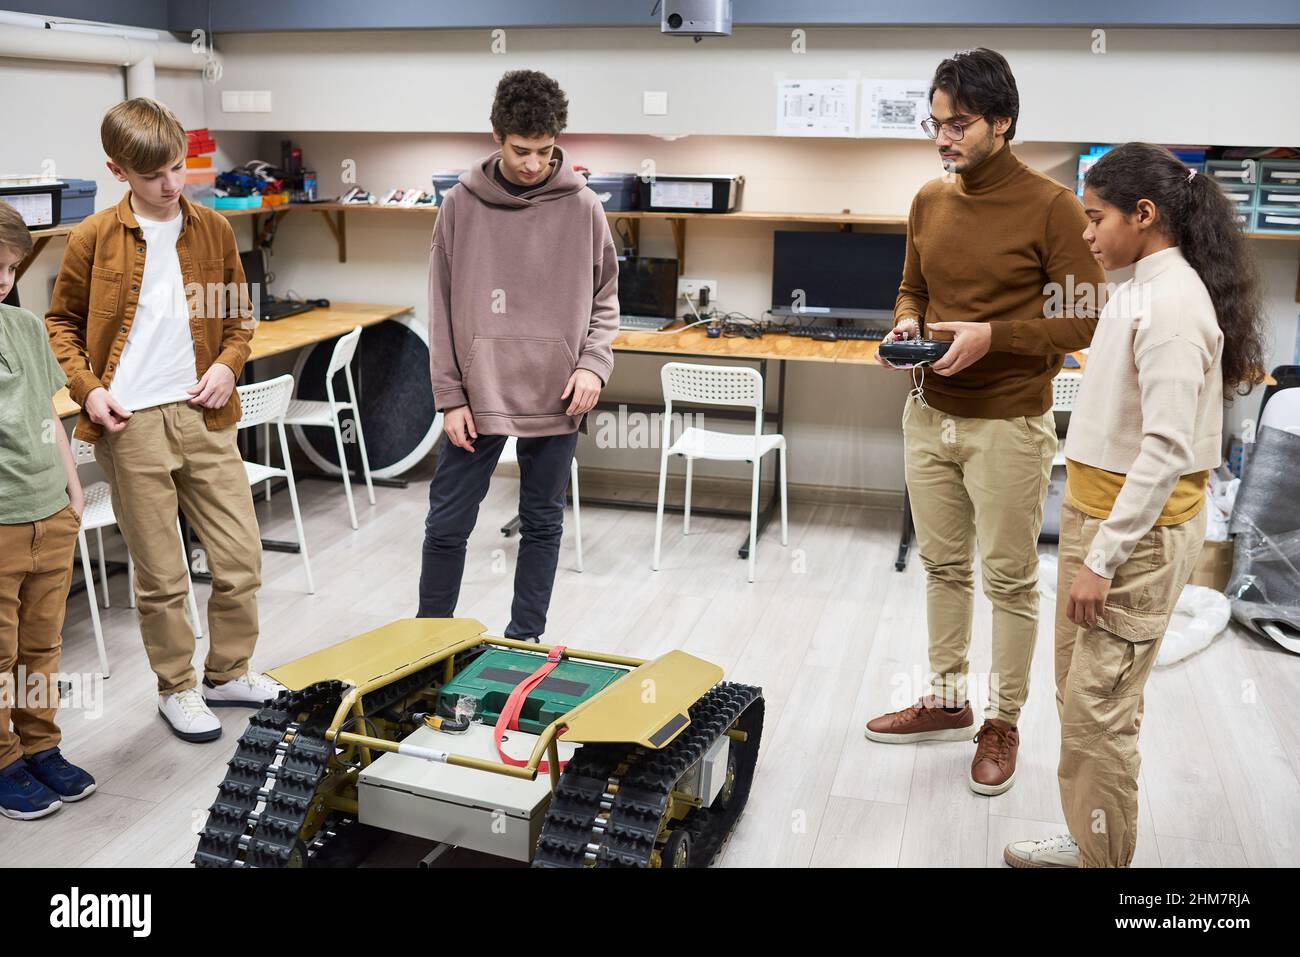 Full length portrait of diverse group of teens operating remote control robot in engineering class at school Stock Photo